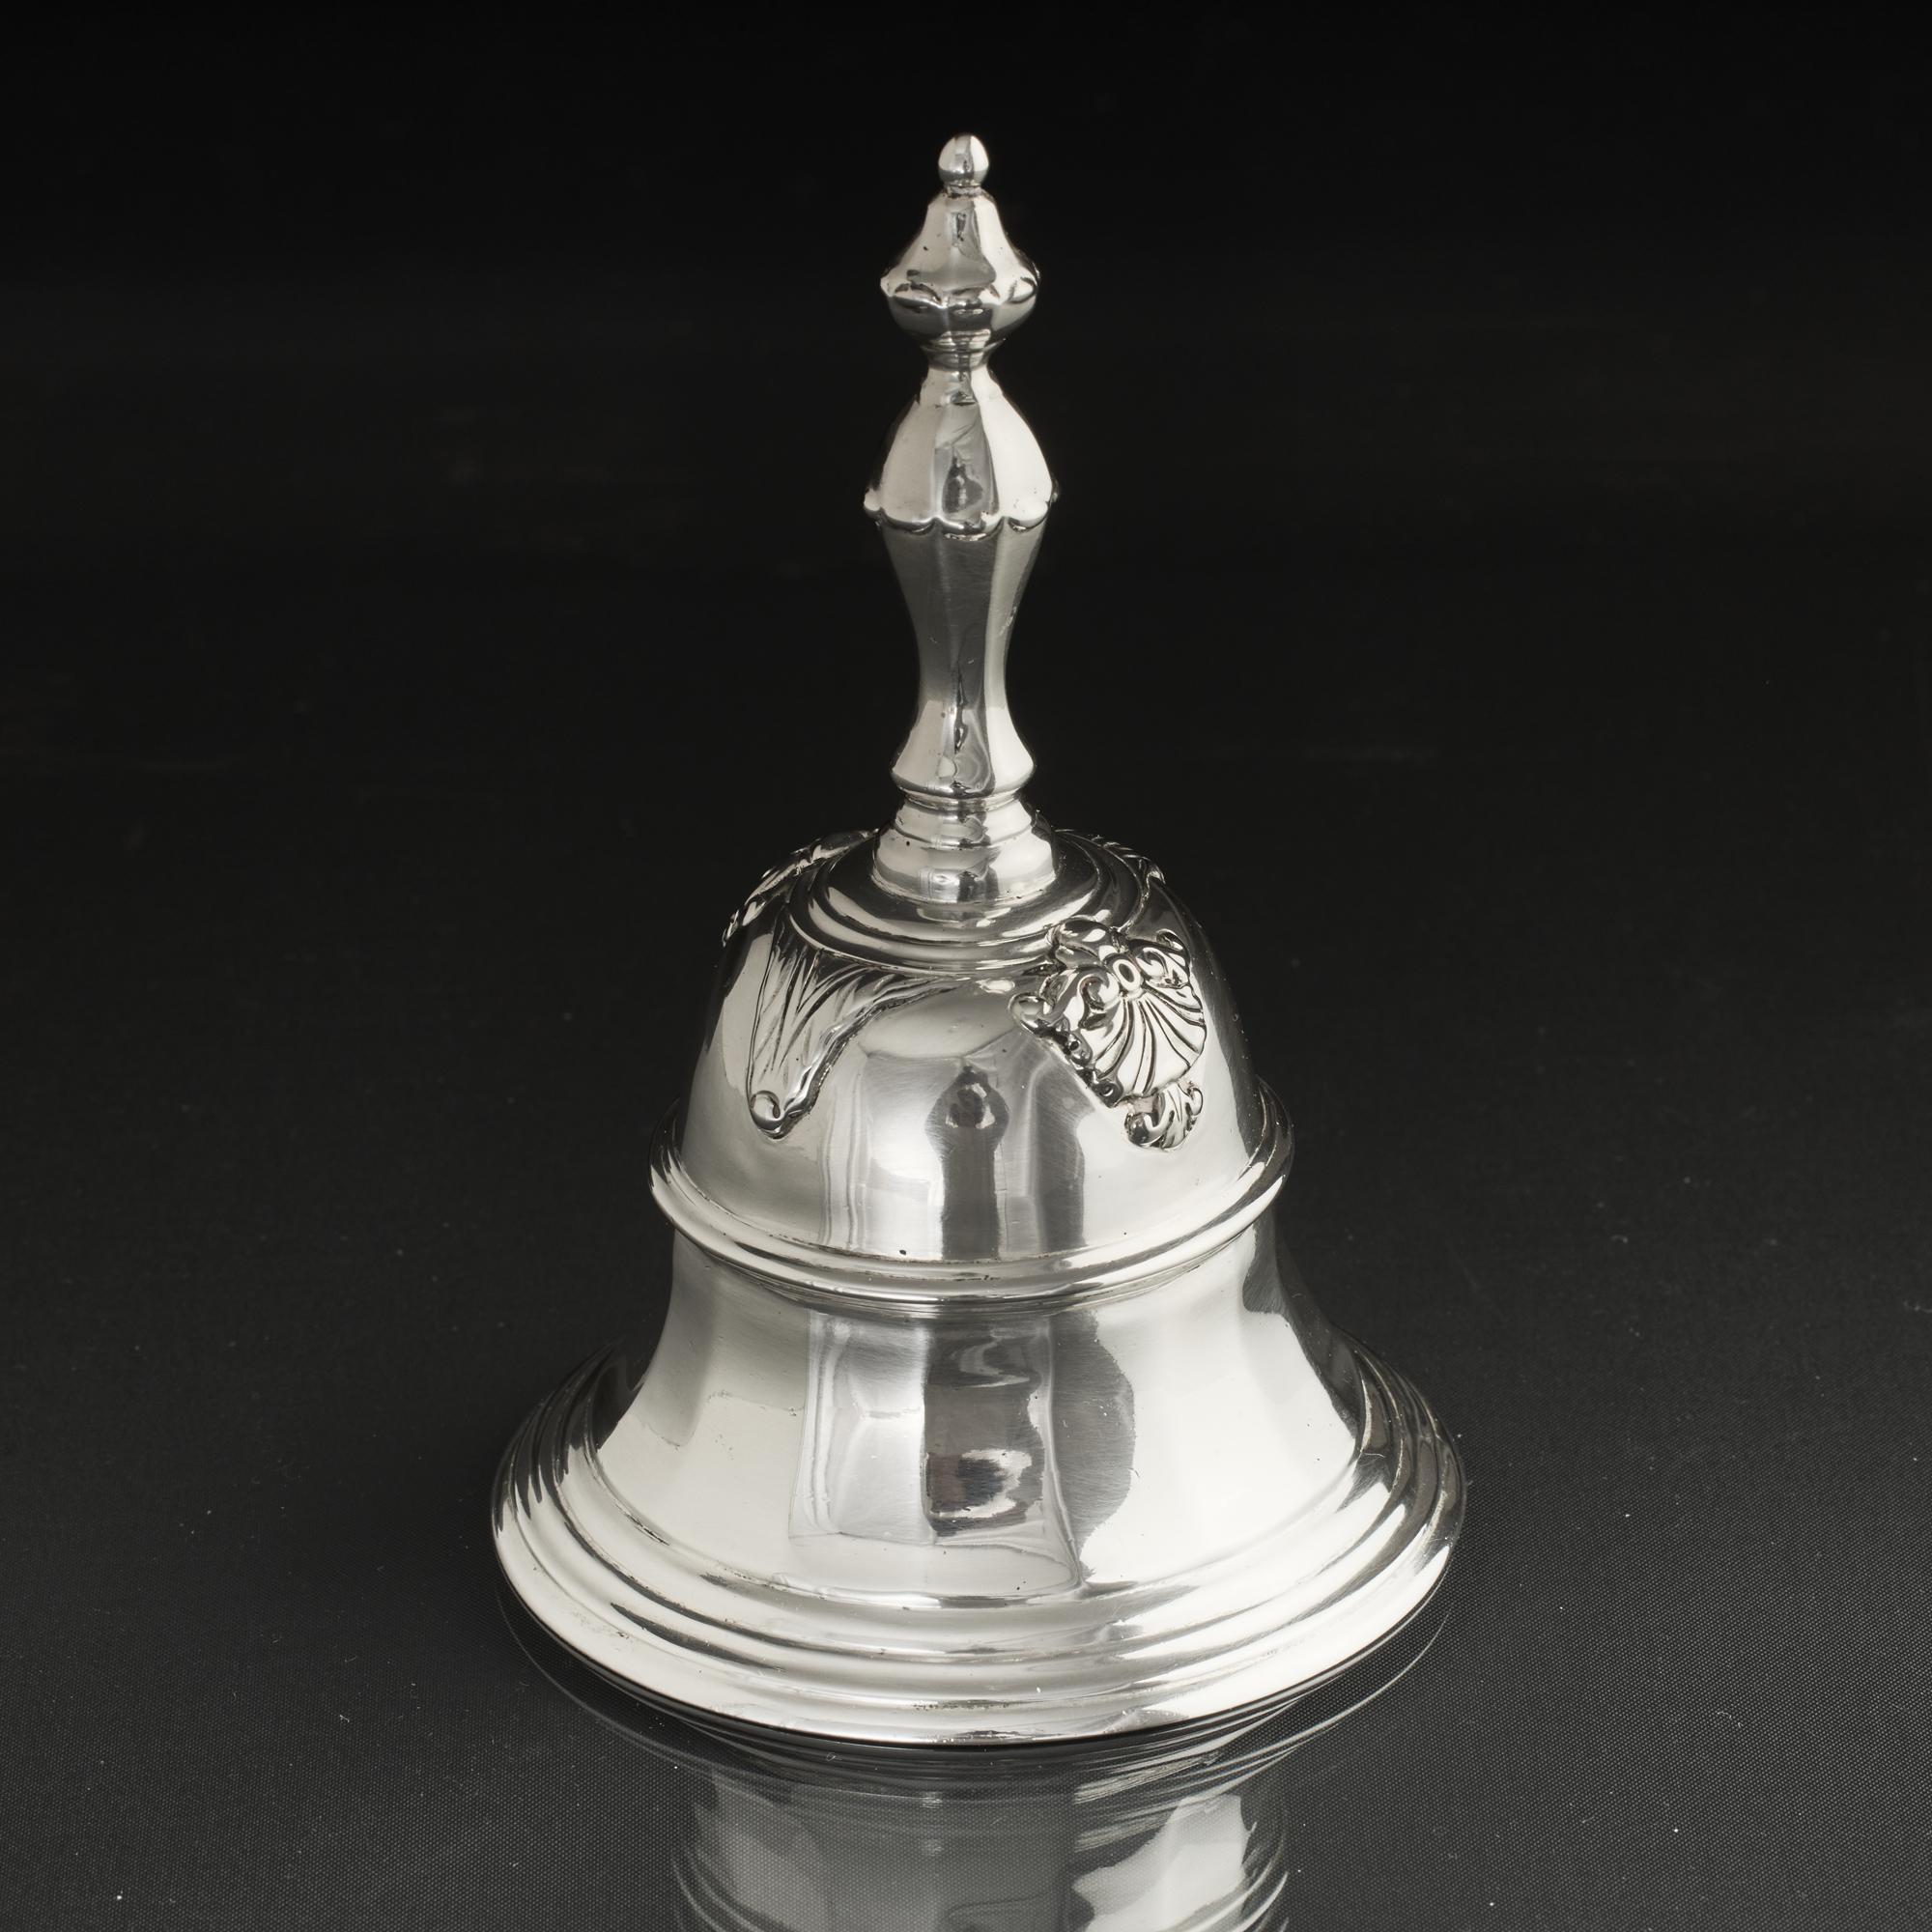 Wonderfully heavy antique silver table bell in the Georgian style with flared panelled body and applied traditional husk and acanthus leaf motifs. This bell is heavily cast in sterling silver which is comfortable to hold and gives a beautiful and